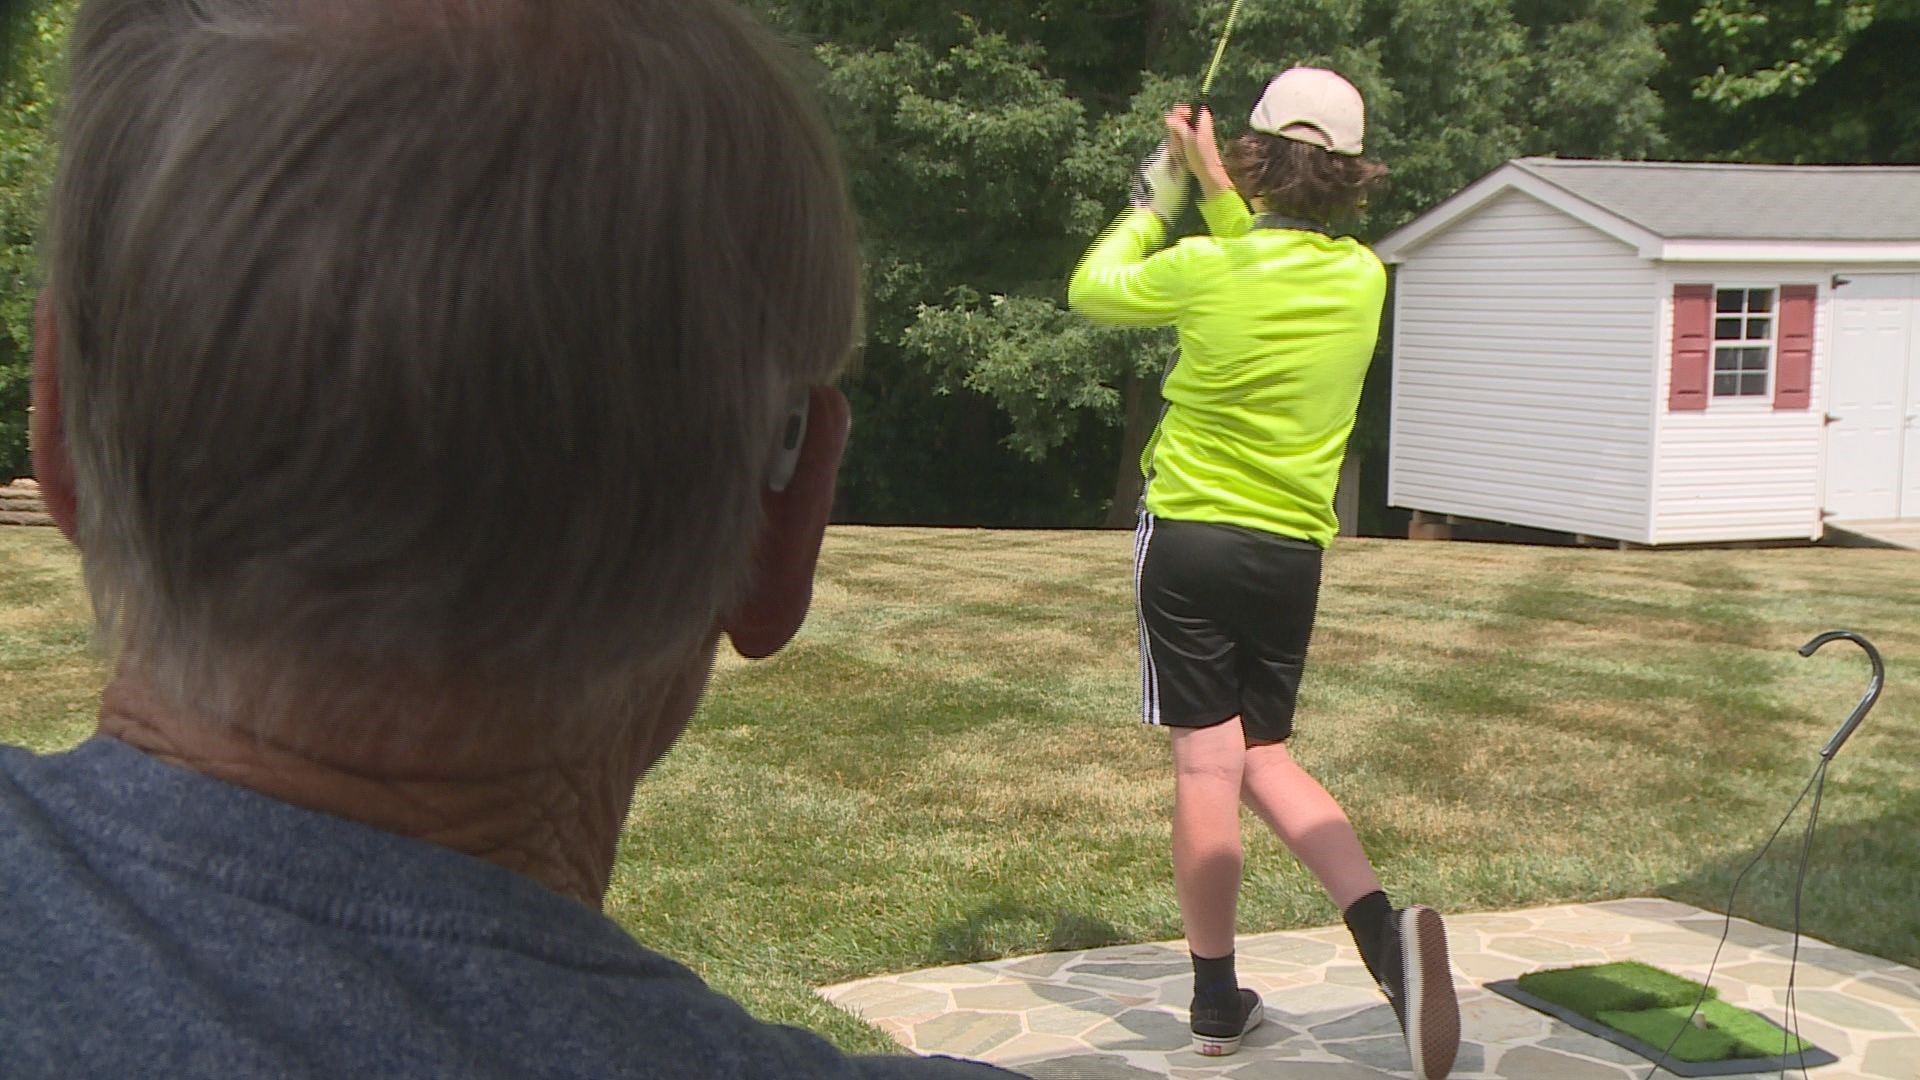 The golf balls kept piling up in a Triad man's yard. He couldn't figure out where they were coming from. The mystery golfer turned out to be 12 years old.